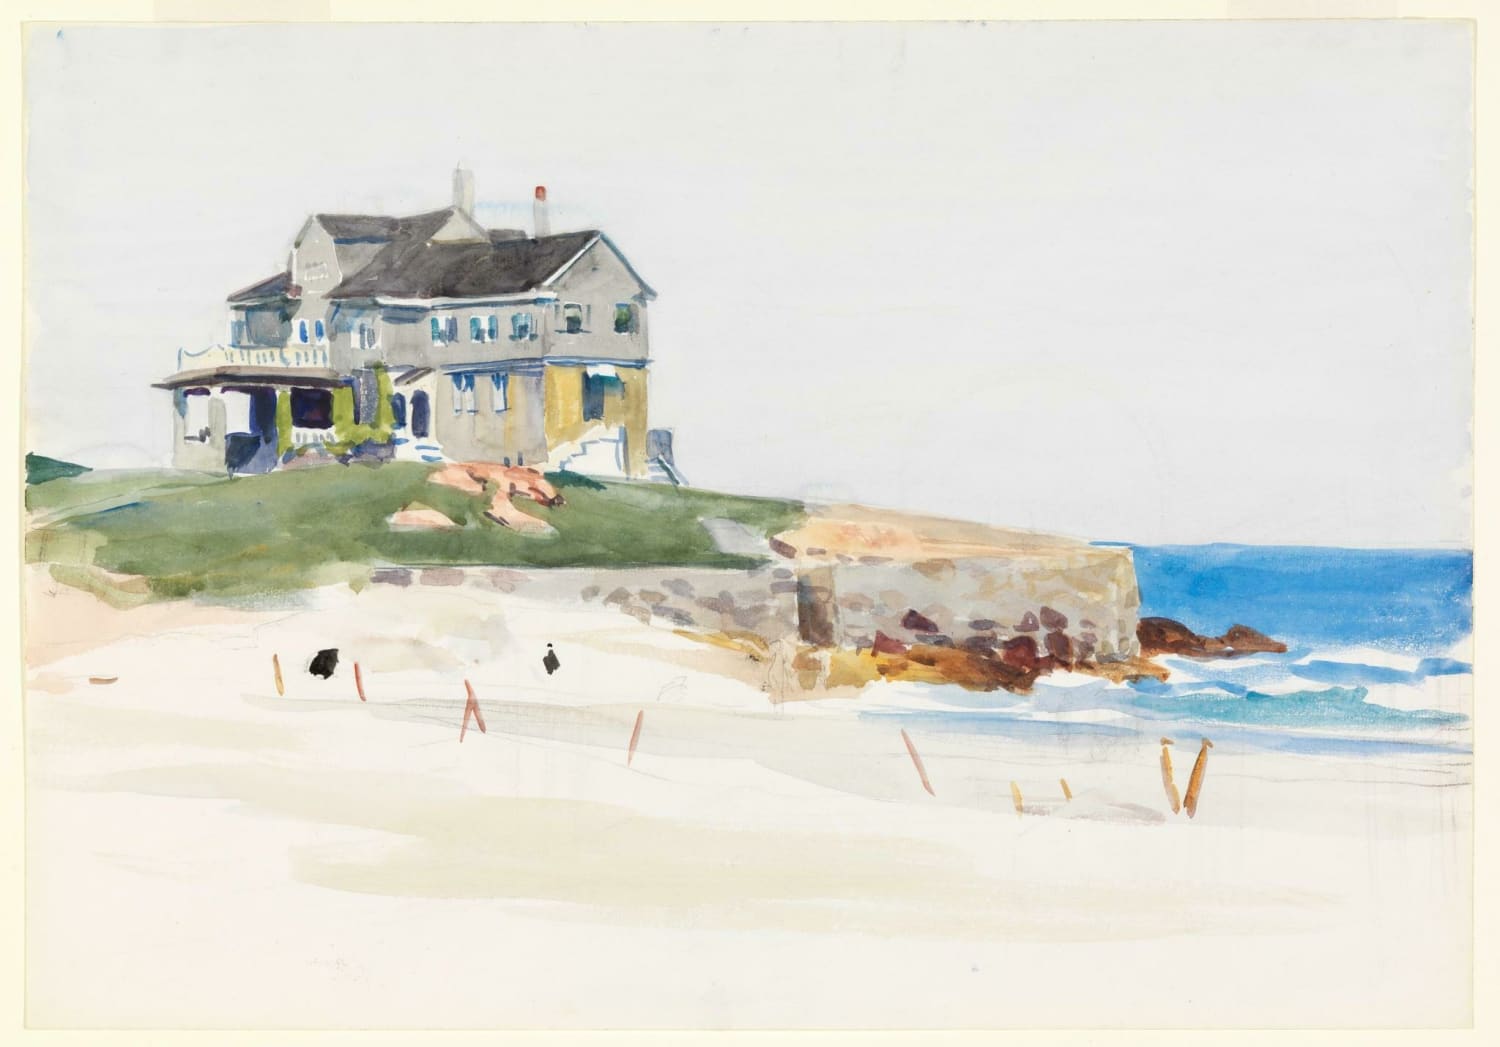 Rooms by the Sea, Edward Hopper, 1951